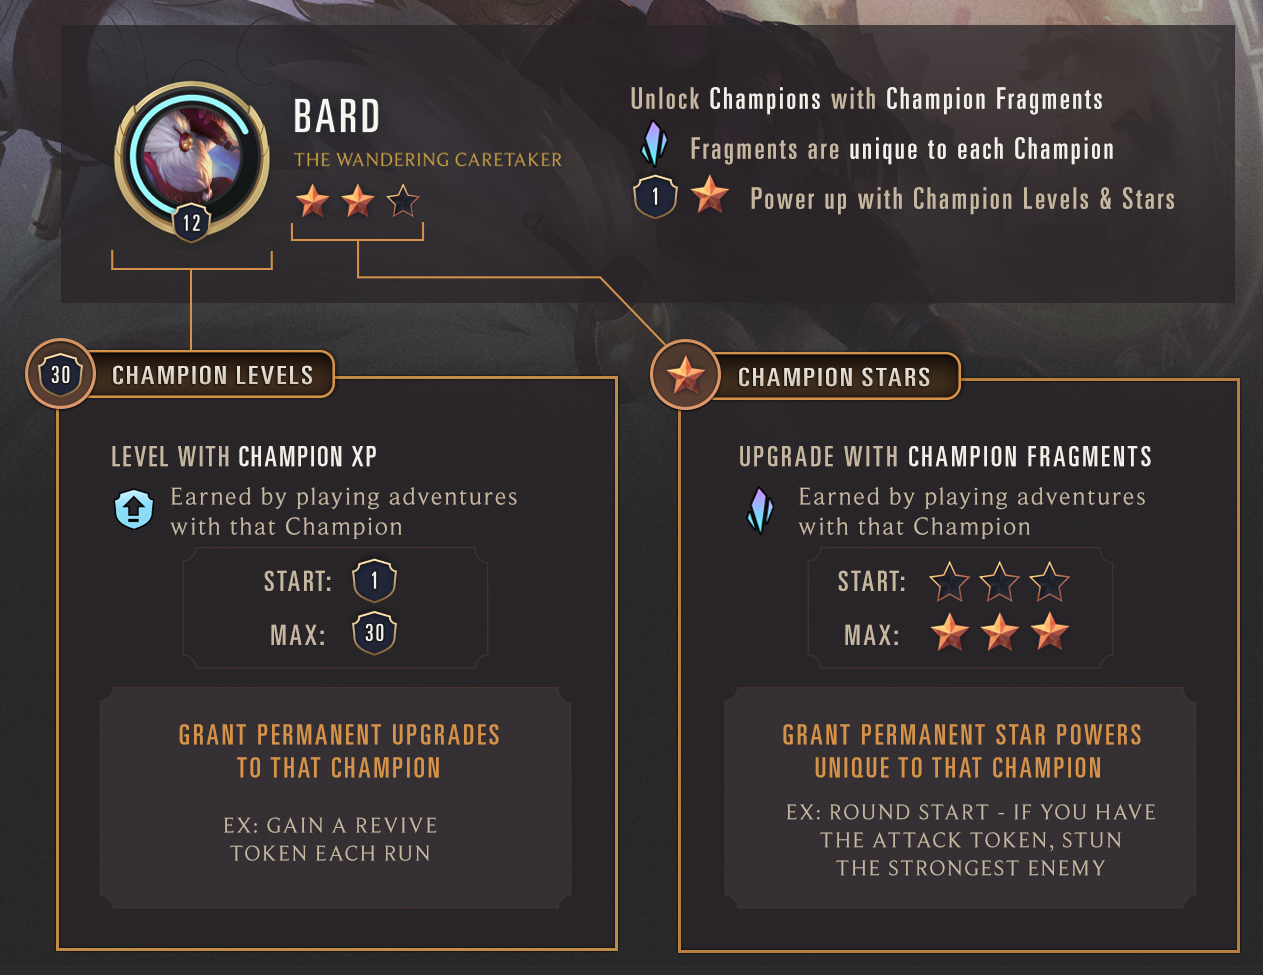 An infographic explaining Champion Levels and Champion Stars.